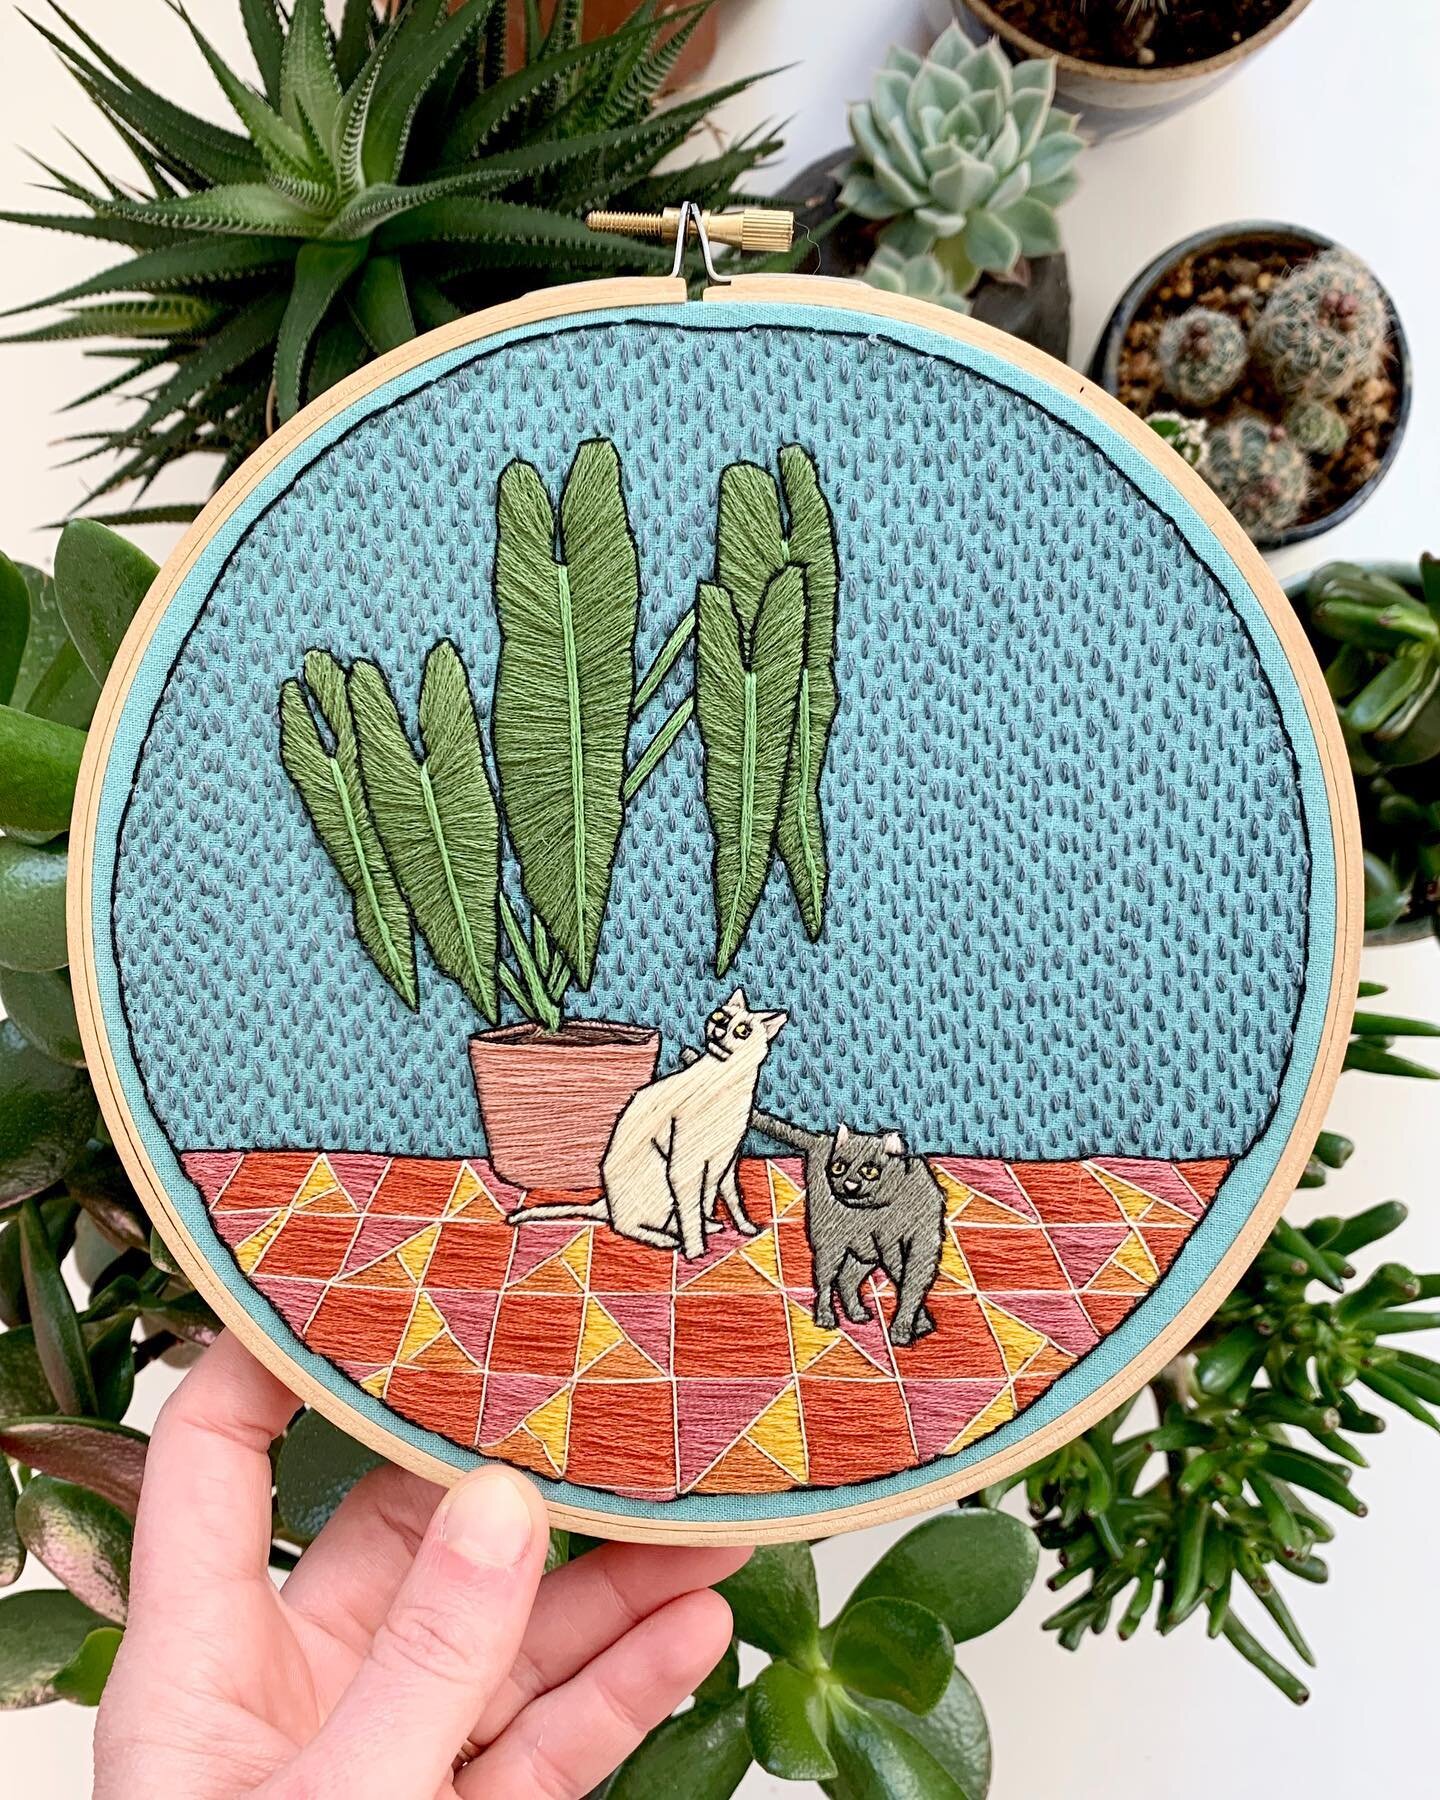 IT&rsquo;S AN AUCTION!
100% of the winning bid on this hand stitched artwork (2020, embroidery floss on cotton, 7&rdquo; wooden hoop) will benefit the National Asian Pacific American Women&rsquo;s Forum ( @napawf )

TO BID: please comment with the am